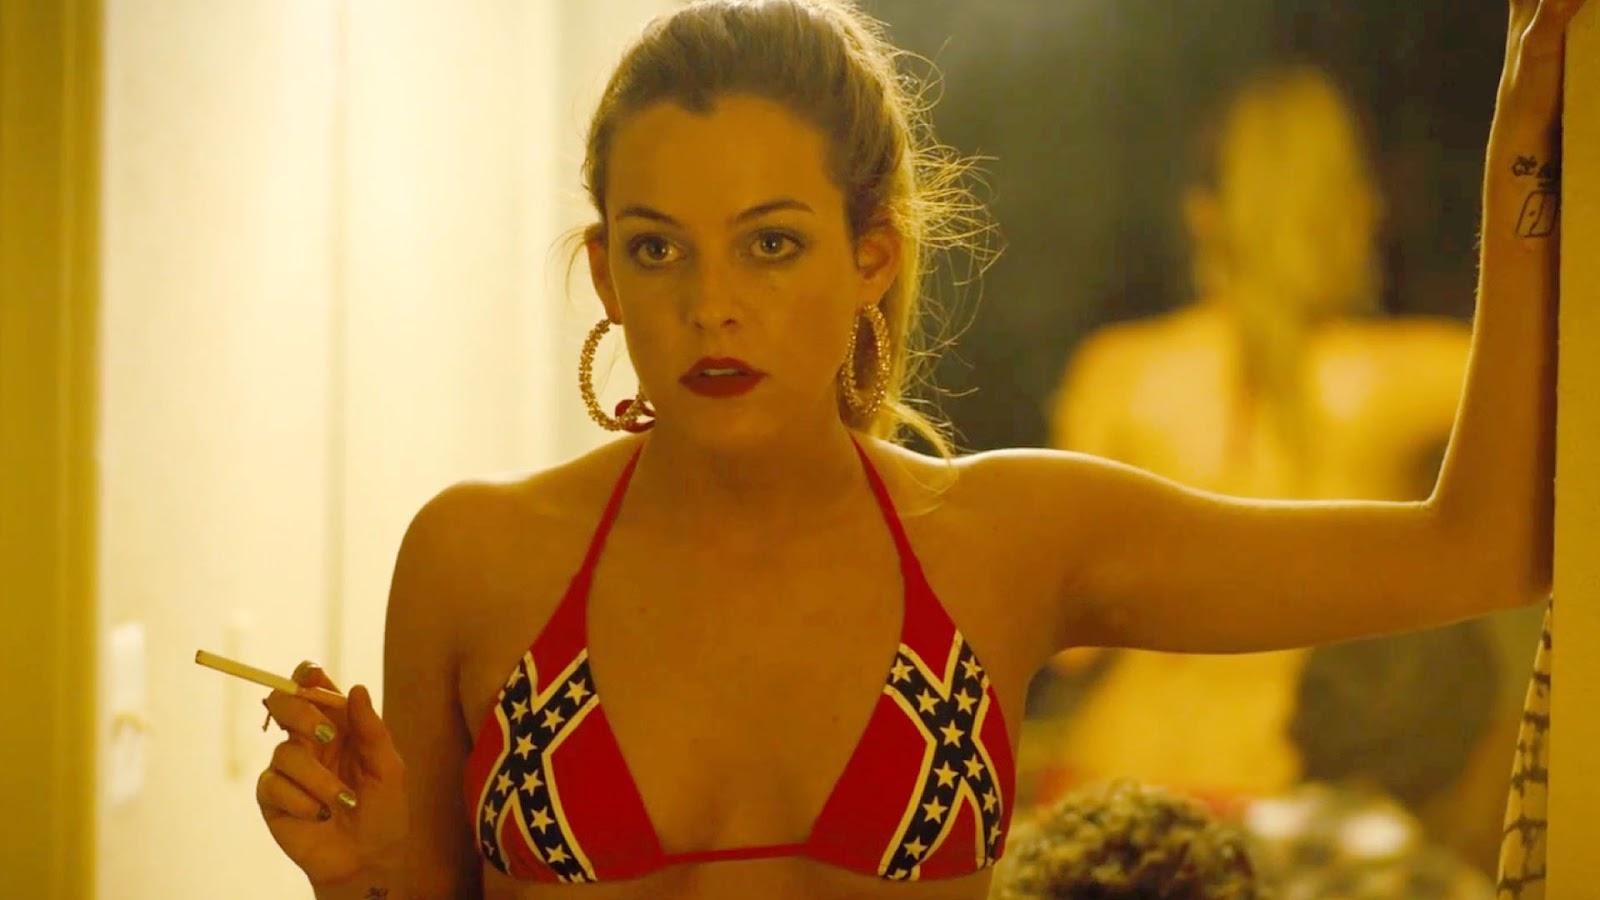 49 Hot Pictures Of Riley Keough Are So Damn Sexy That We Don’t Deserve Her | Best Of Comic Books